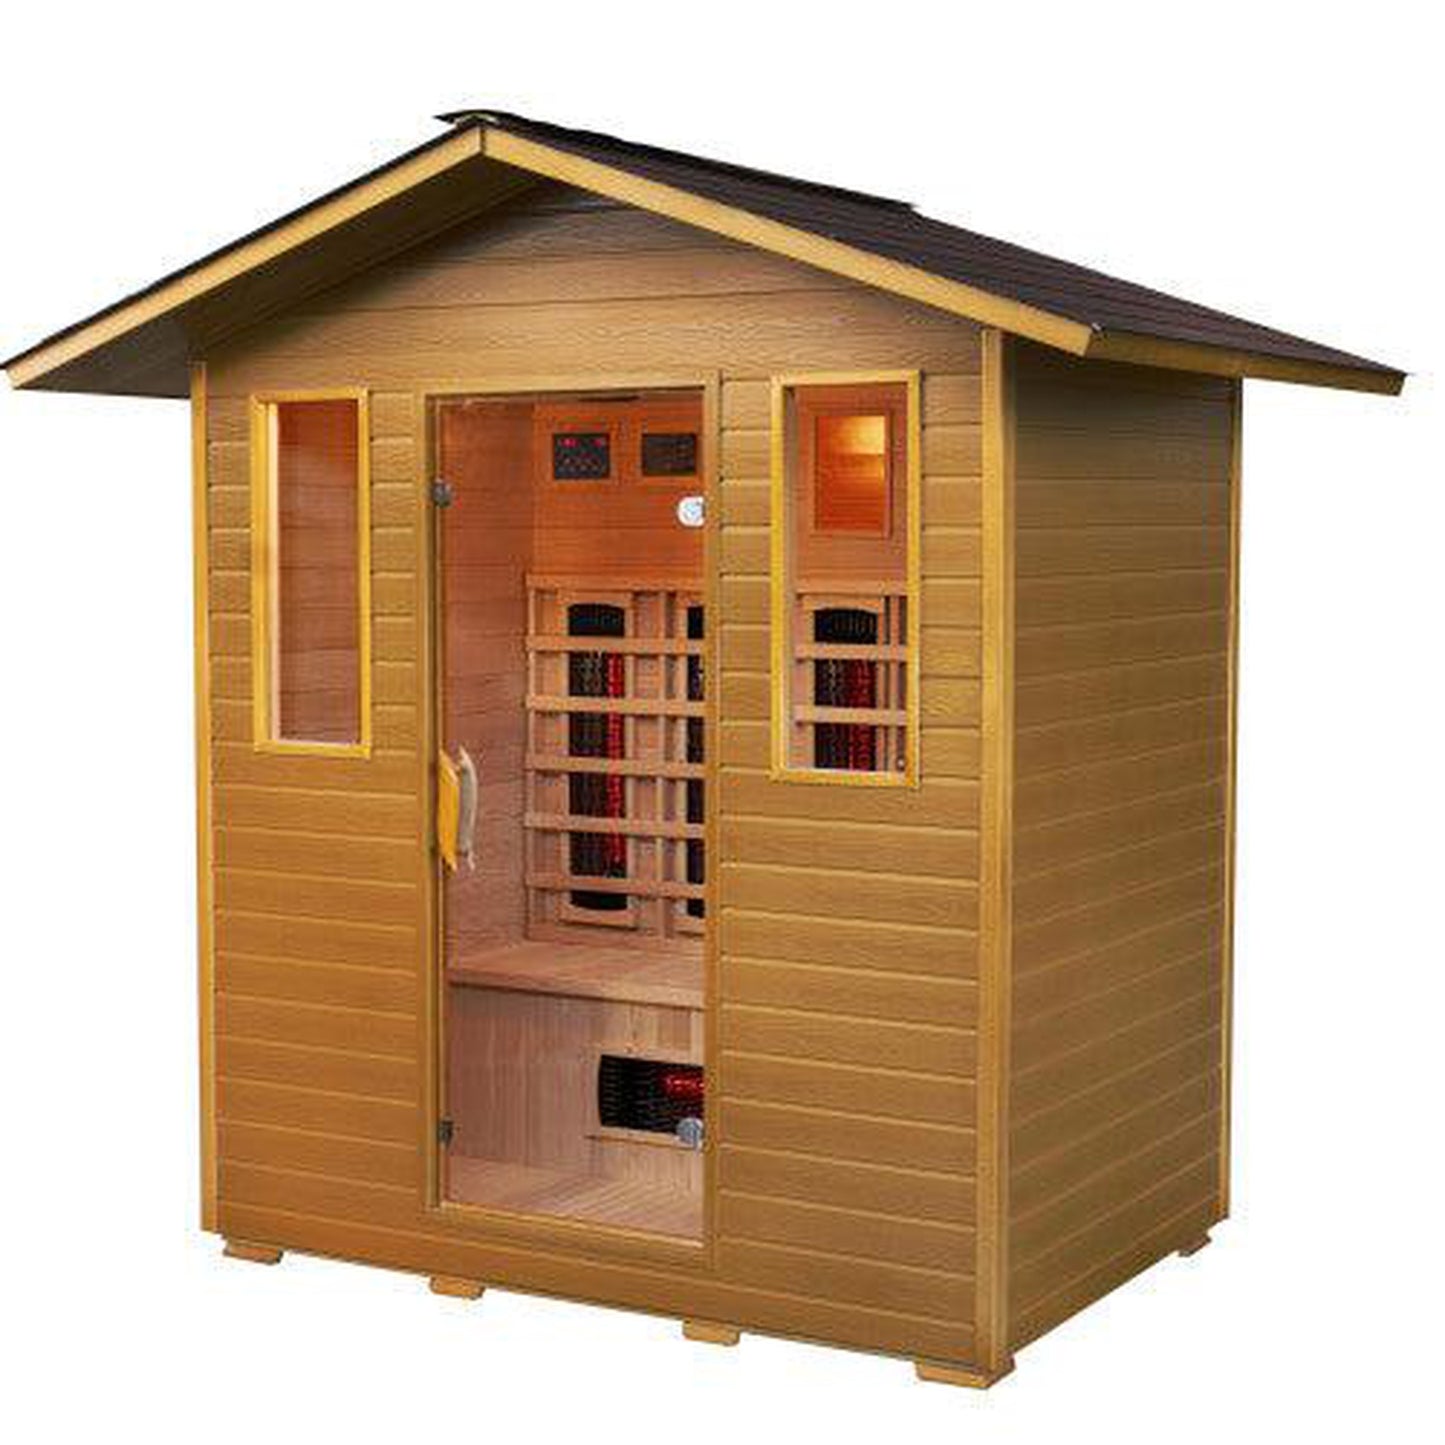 SunRay Cayenne 4-Person Outdoor Infrared Sauna In Hemlock Wood With Ceramic Heaters